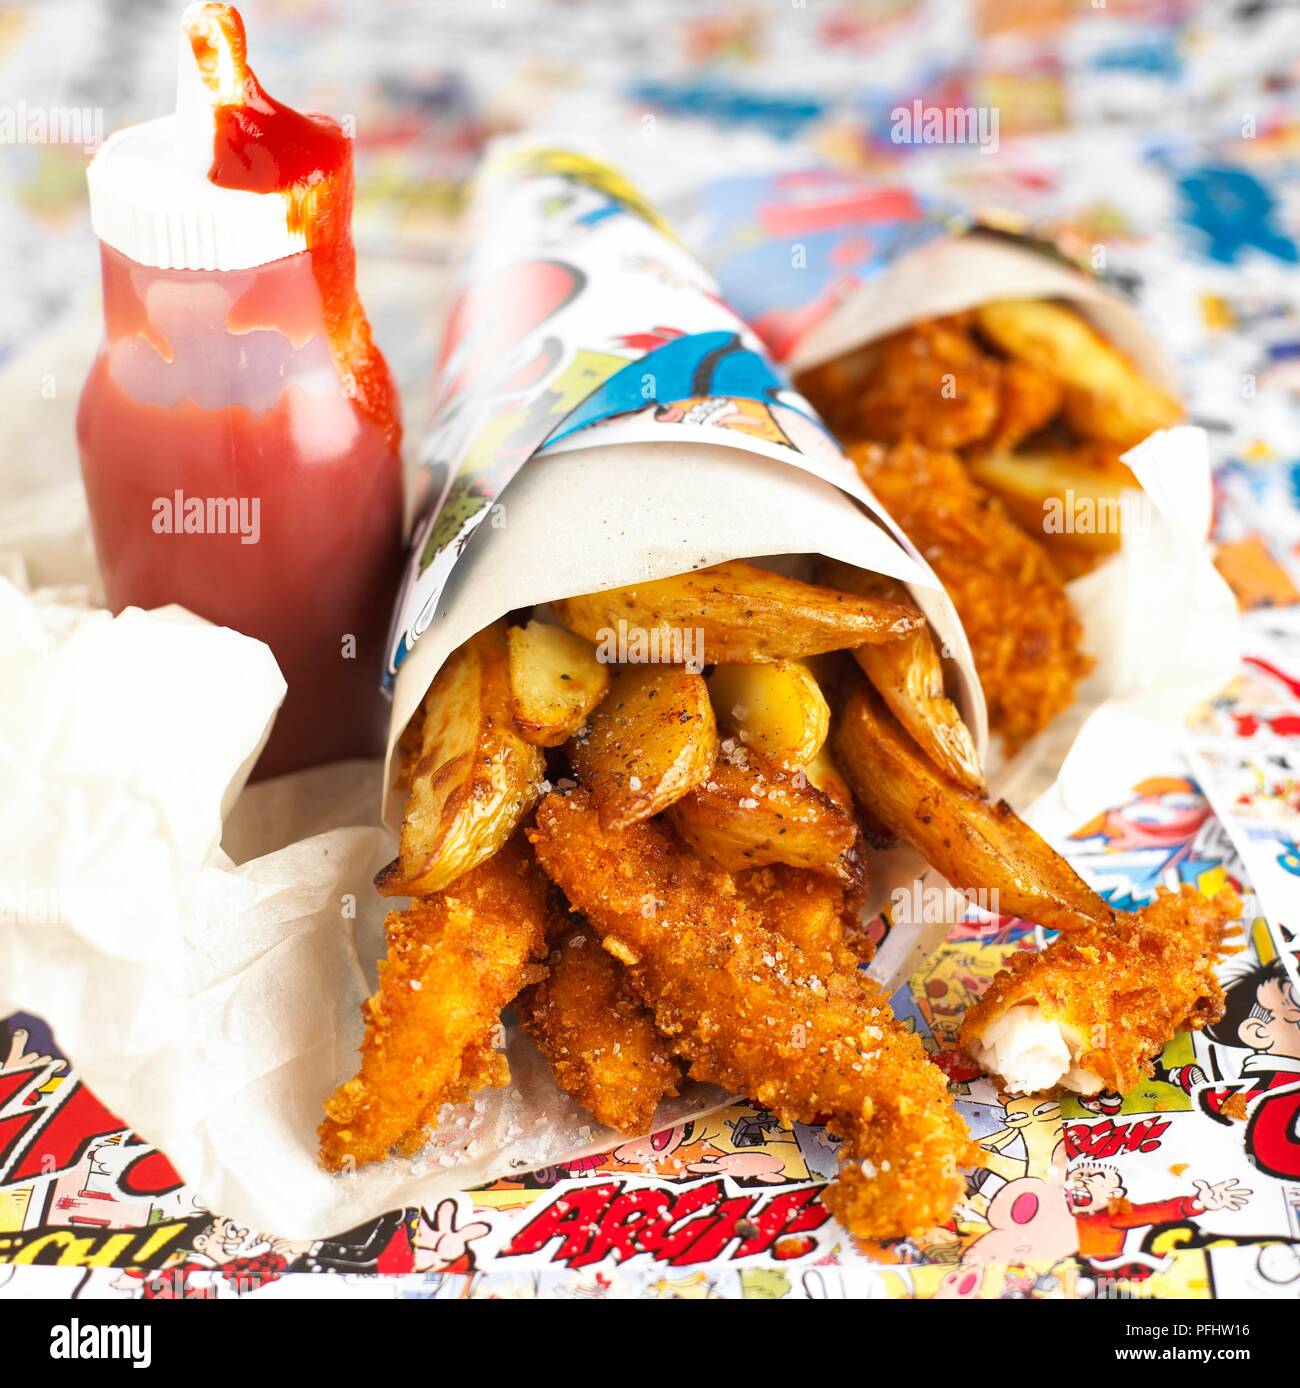 Deep-fried pieces of fish and chips in paper cone, next to bottle of tomato ketchup Stock Photo